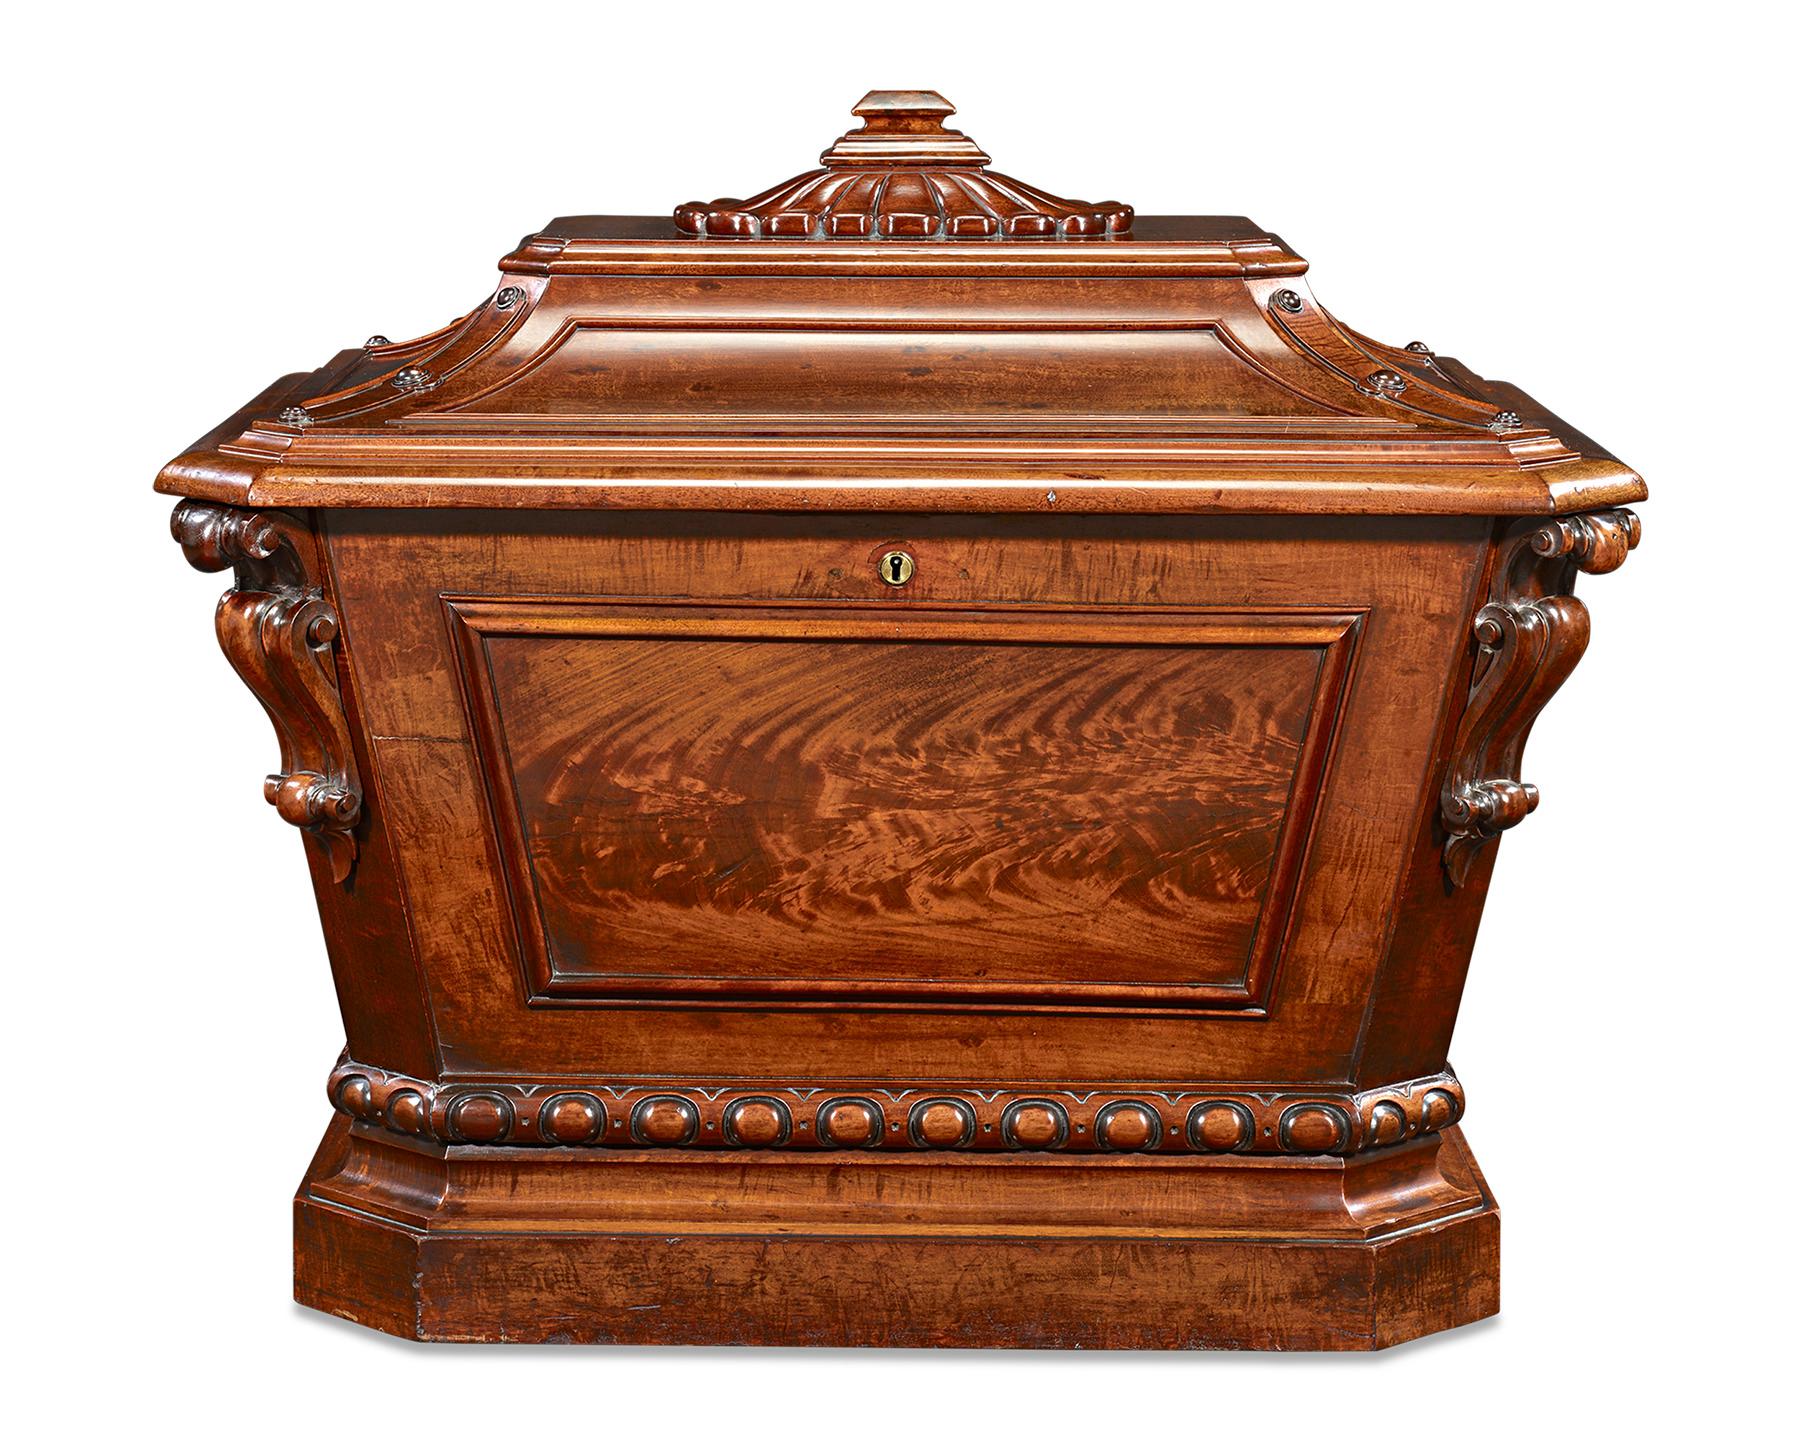 This rare William IV-era Irish sarcophagus wine cellarette, or cooler, is crafted of rich mahogany. Exhibiting beautifully carved details, this cellarette is a marvel of Neoclassical artistry. As practical as it is beautiful, the cooler features 18